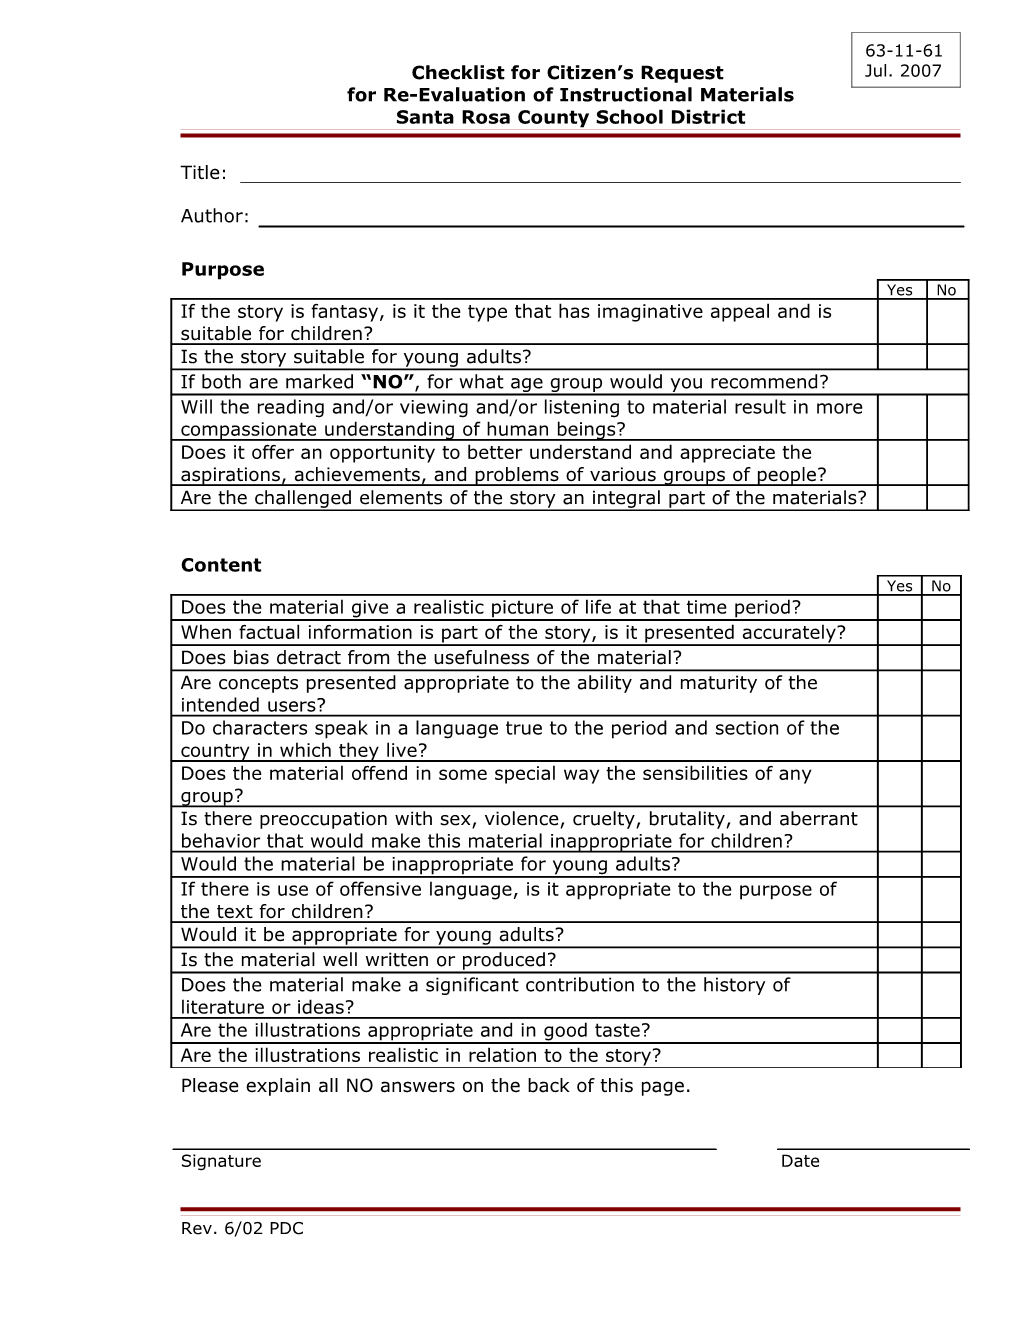 Checklist for Citizen S Request for Re-Evaluation of Instructional Materials